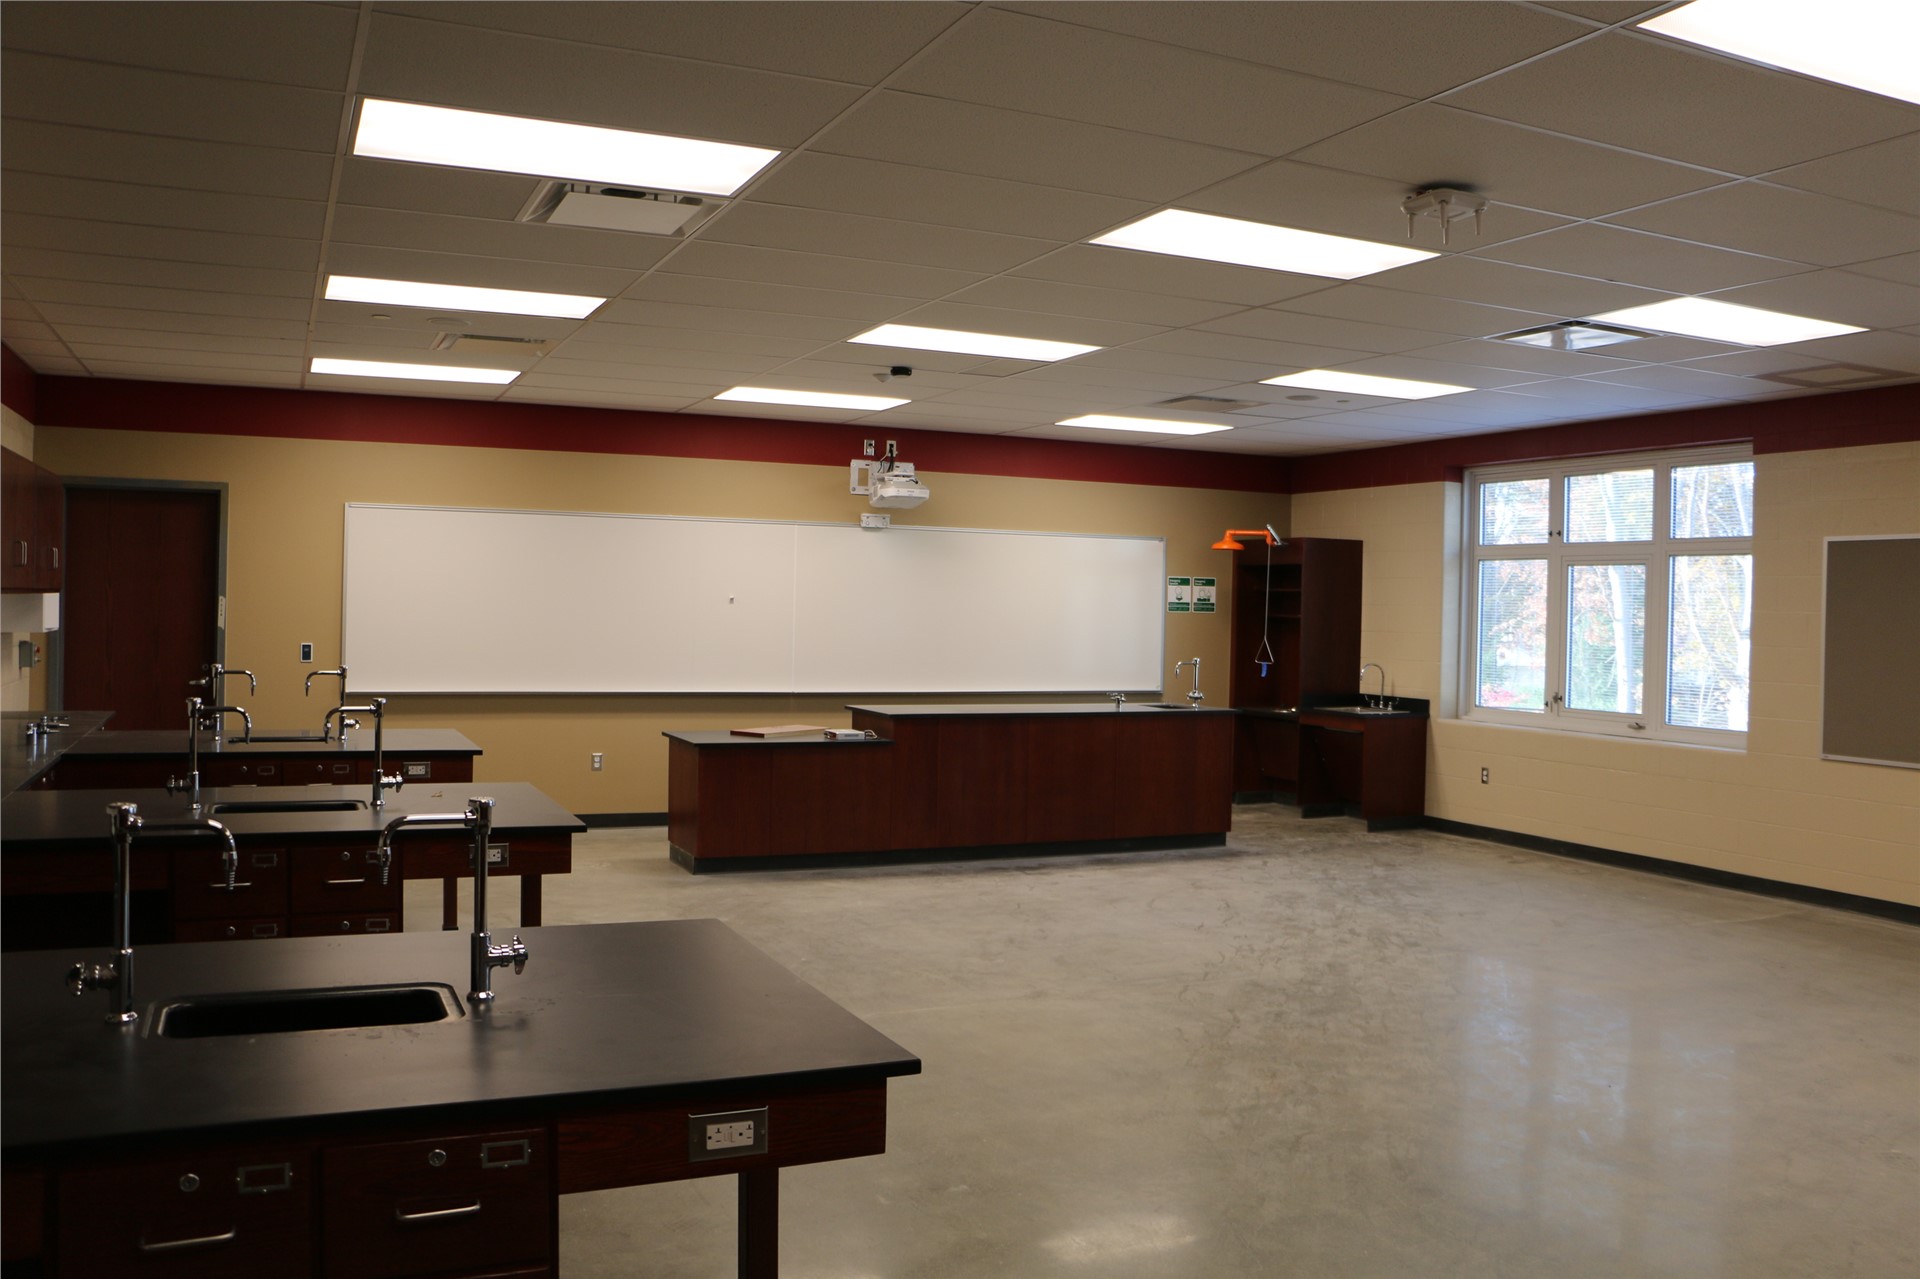 Typical Science Classroom/Lab - Teaching/Front Wall